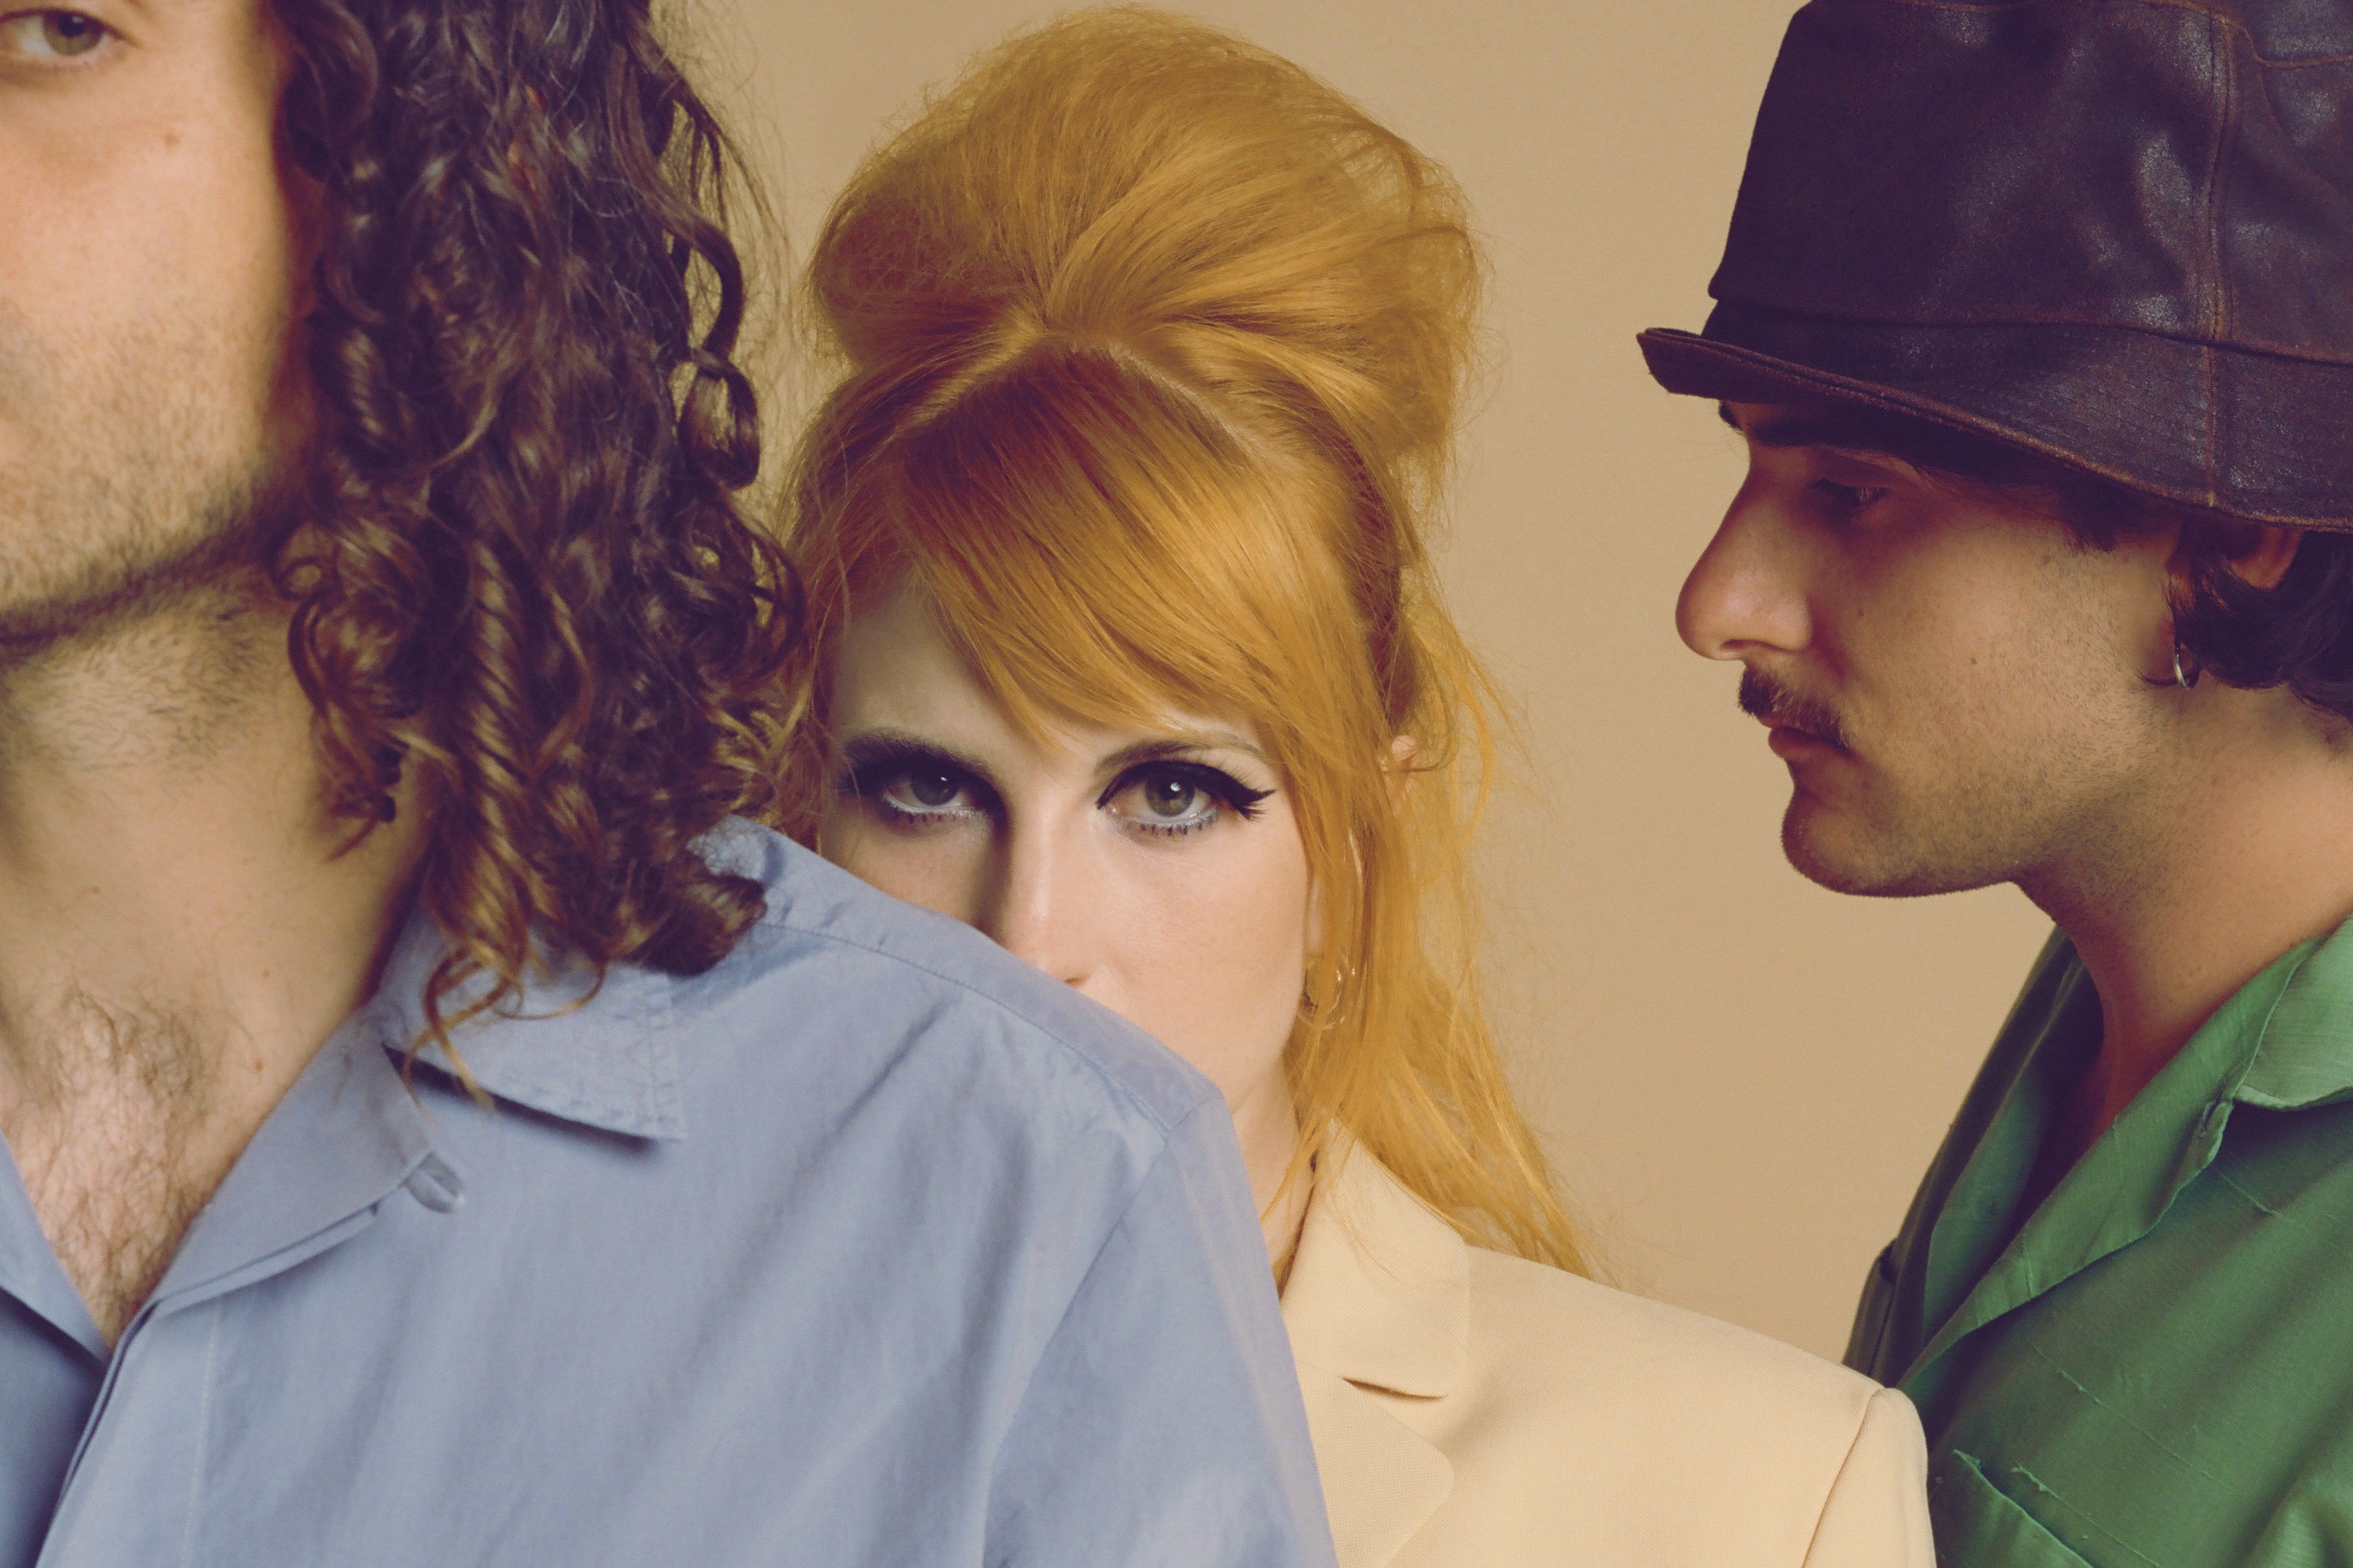 The band Paramore stands in front of a beige colored background. On the left: Taylor York wears a light blue shirt as he faces the camera with half of his face out of frame, center: Hayley Williams wears a peach colored blazer as she stands behind York and stares directly at the camera, the bottom half of her face hidden by York's shoulder, on the right: Zac Farro looks away from the camera, showing his side profile, in a green shirt. 